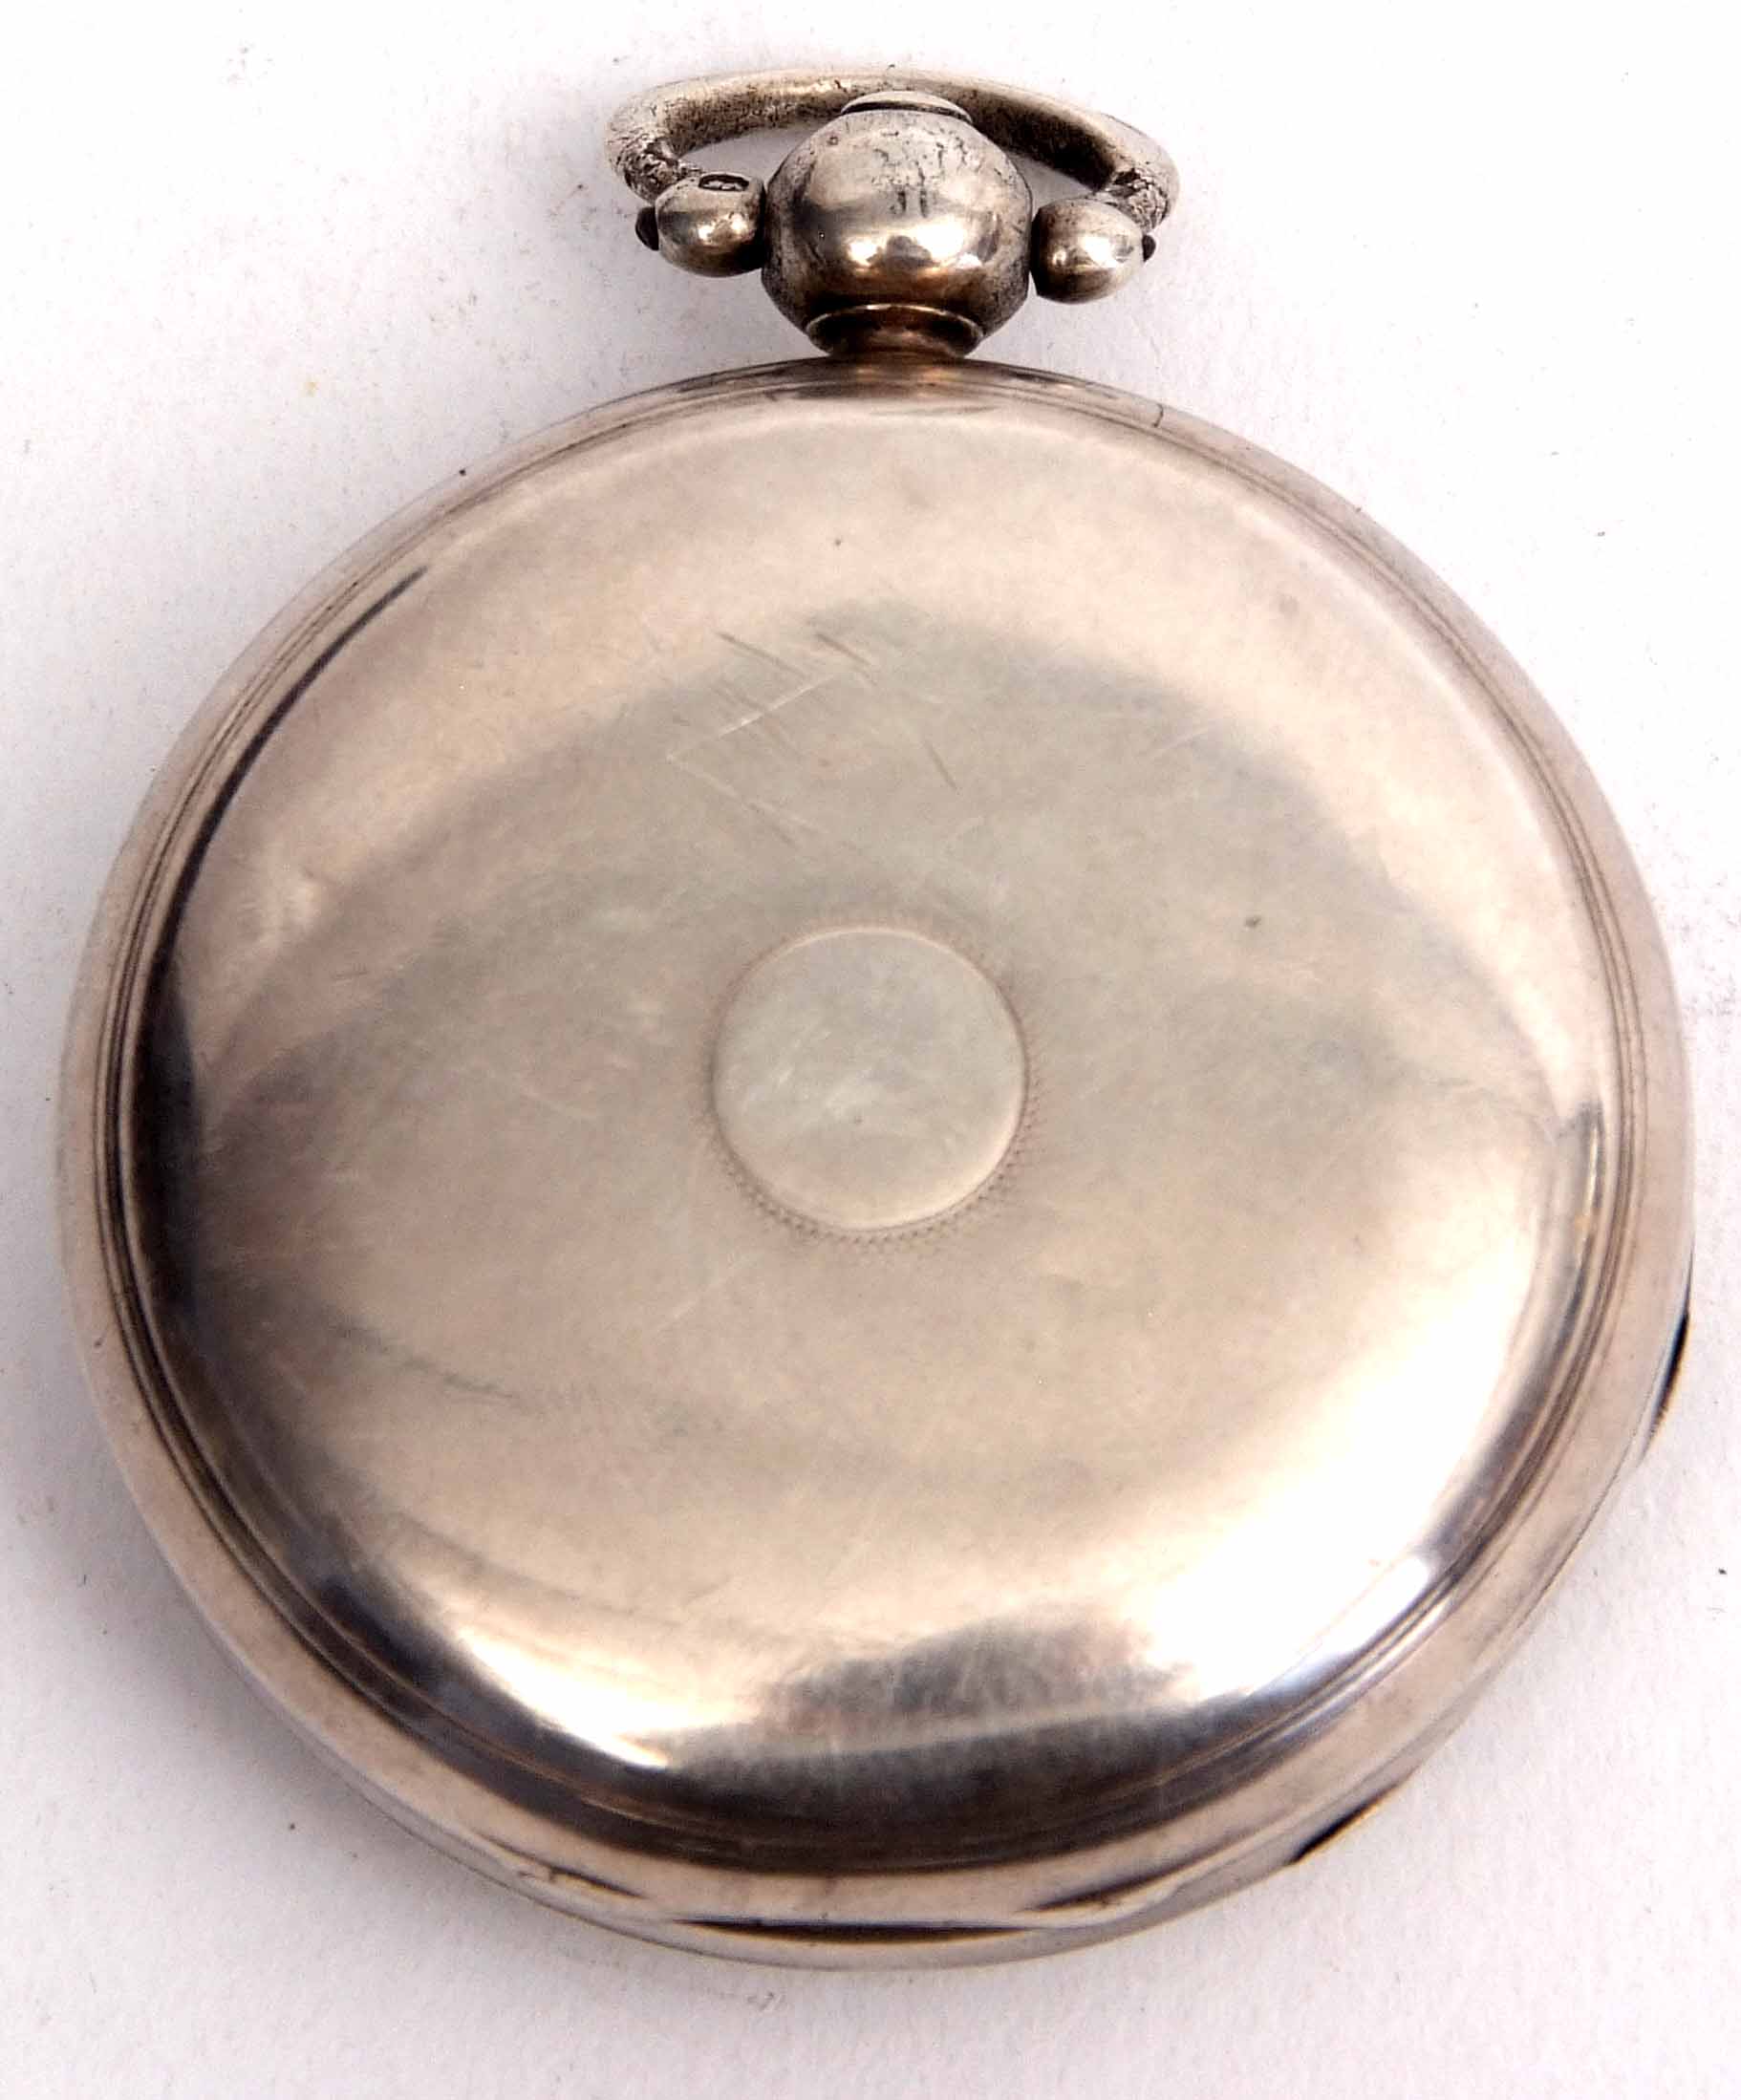 Second quarter of 19th century silver cased open face lever watch, A Martin - 6 Market St, Brighton, - Image 2 of 2